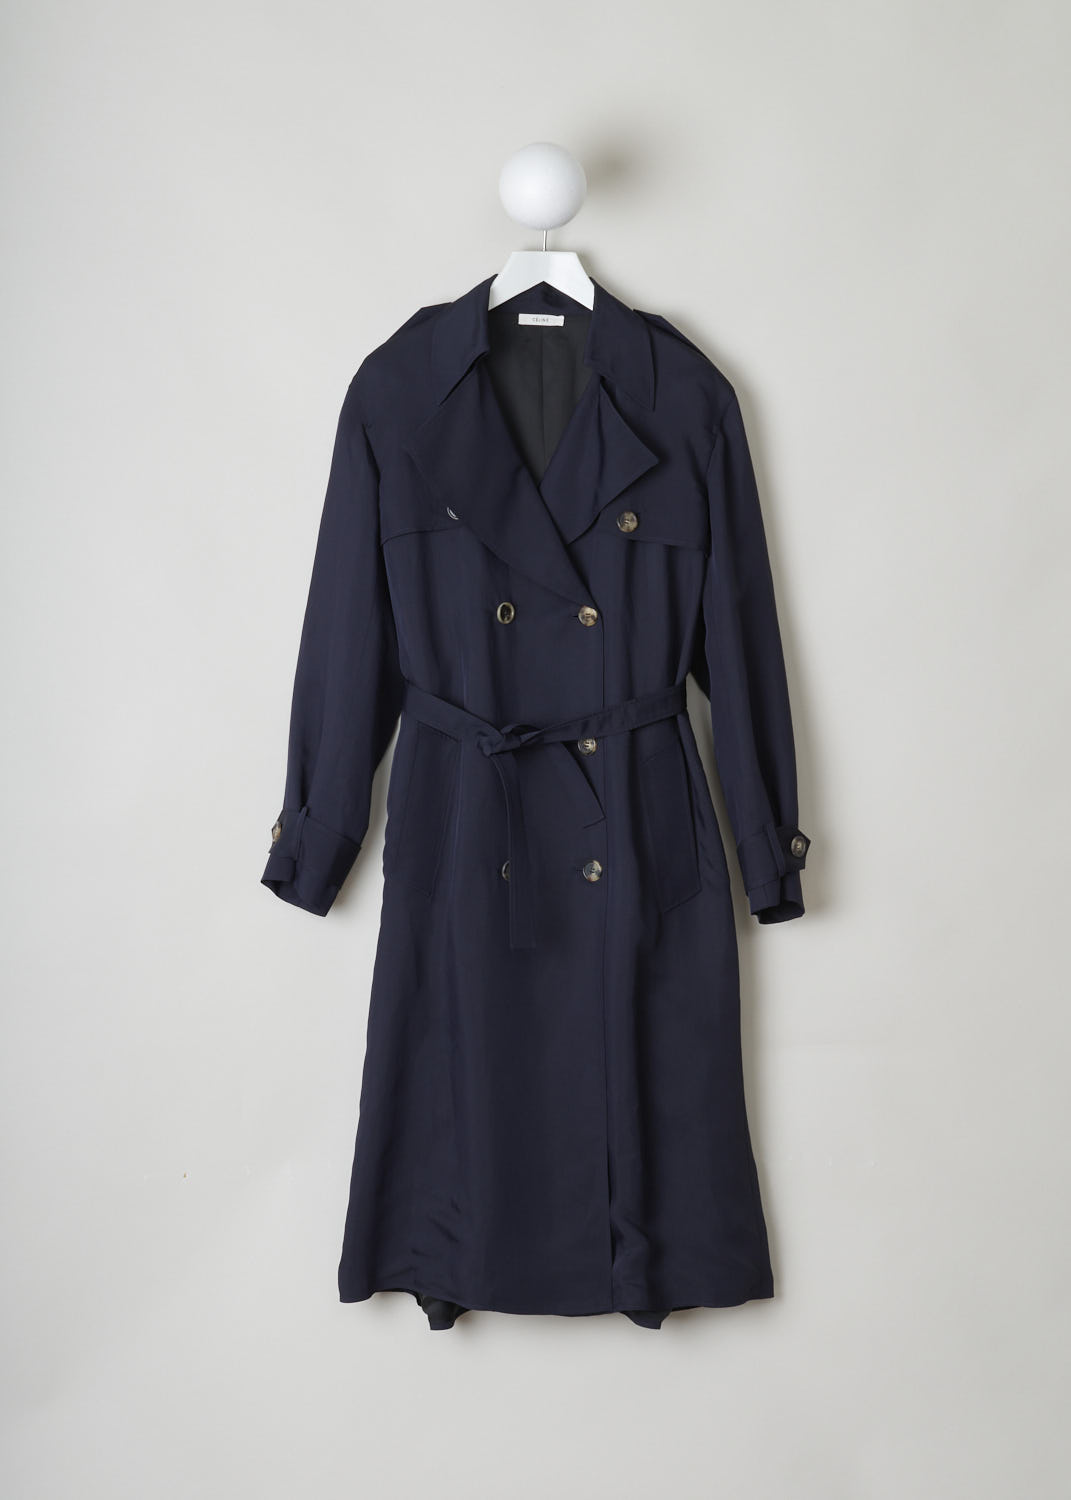 CÉLINE, MIDNIGHT BLUE RAINCOAT, 6464_28U36_0MI_C01, Blue, Front, Elegant midnight blue trench coat. The coat has a notched lapel and classic details such as epaulets and storm flaps. Two rows of buttons form the closing option. The coat comes with a matching belt to cinch in the waist. The long sleeves have sleeve straps on the cuffs. A slanted pocket can be found on either side. In the back, the coat has a centre slit.